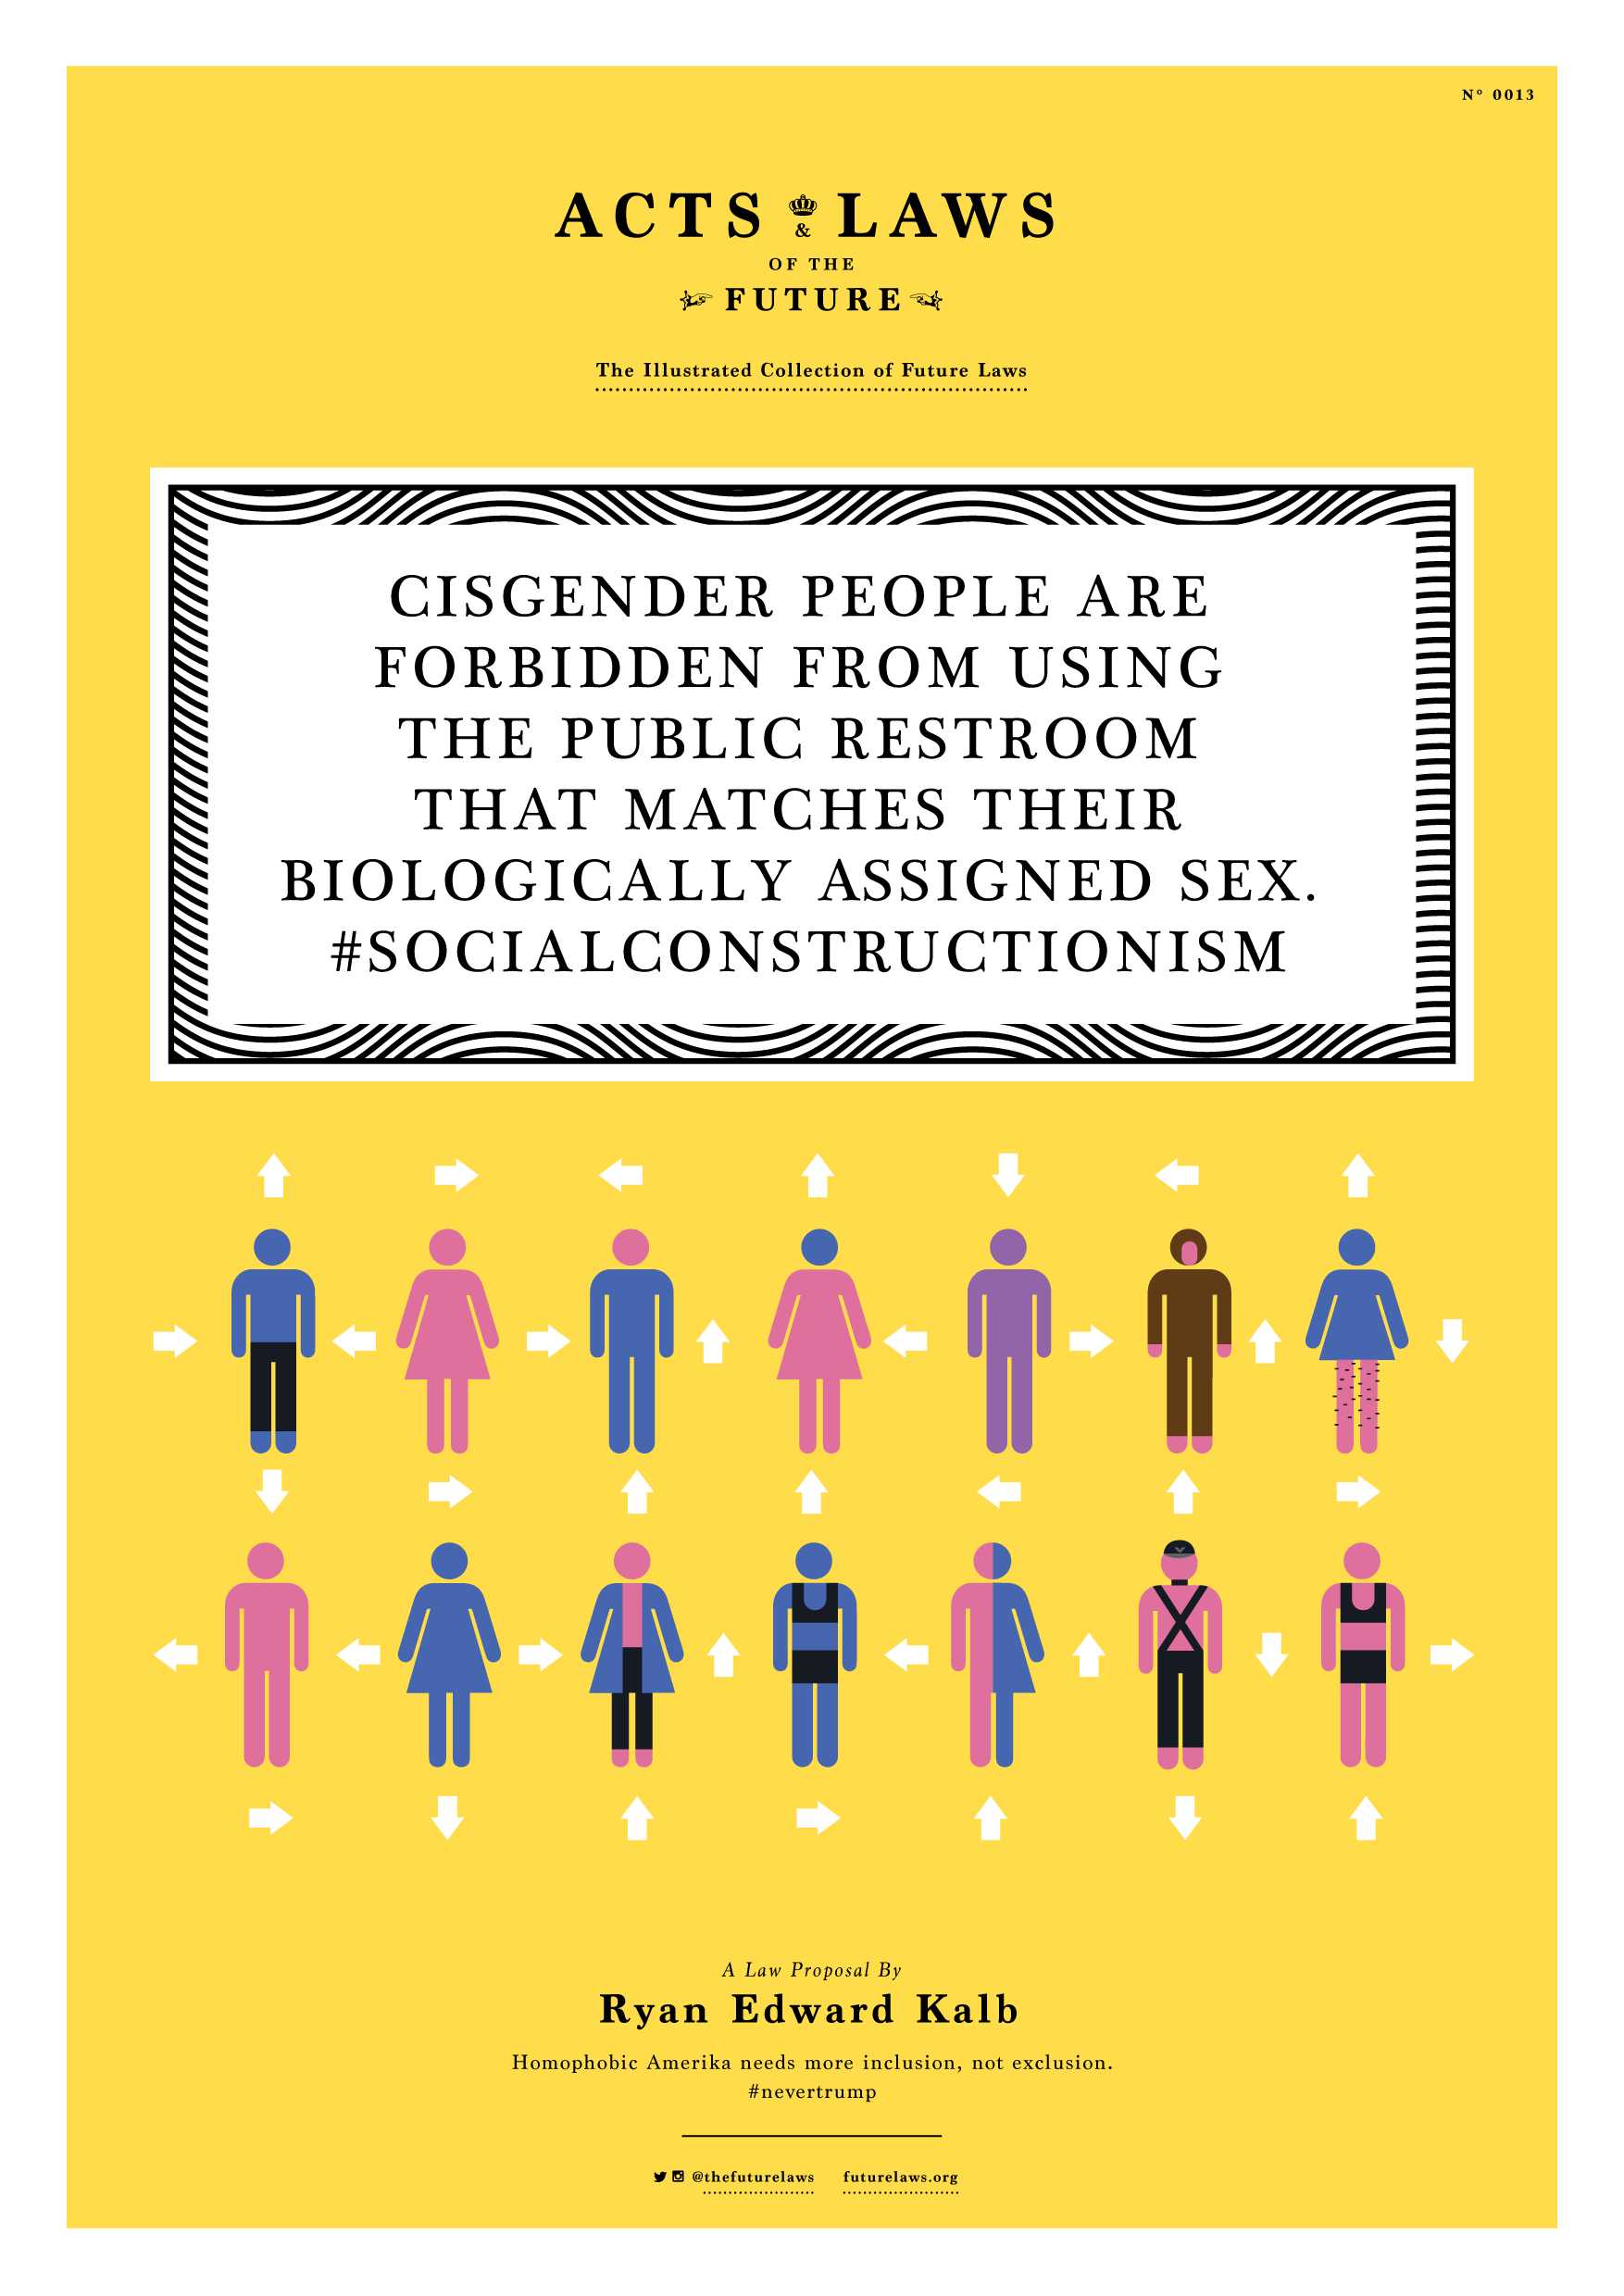 Cisgender people are forbidden from using the public restroom that matches their biologically assigned sex. #socialconstructionism